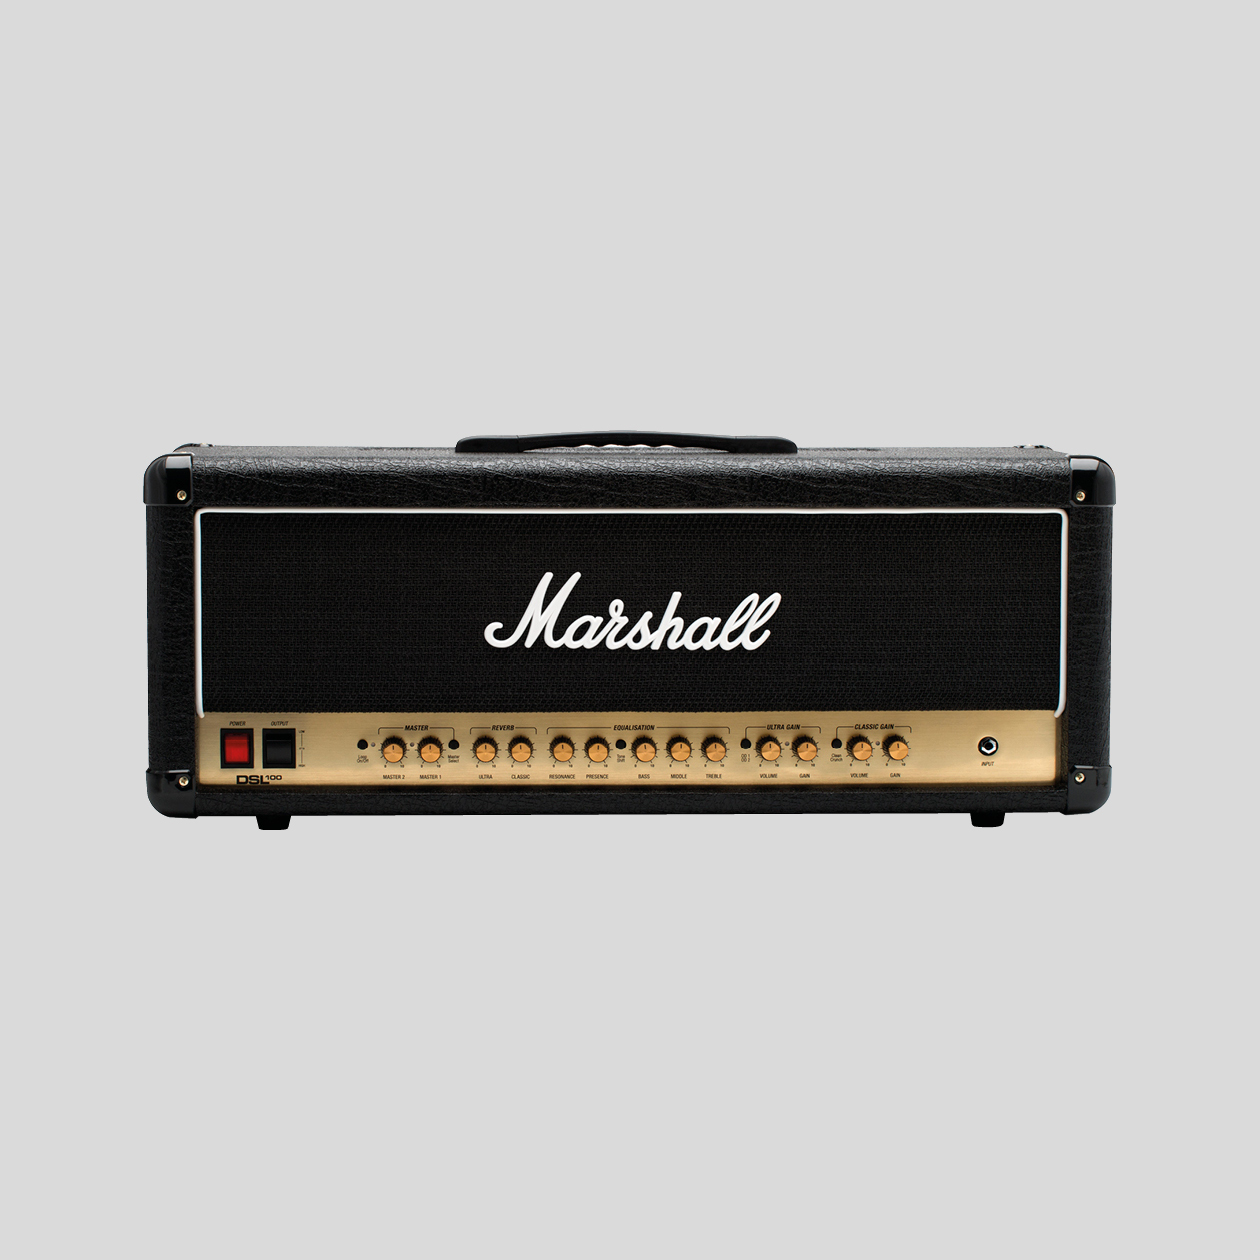 Marshall 100W All Valve 2 Channel Head with 2 Channels, Resonance and Digital Reverb